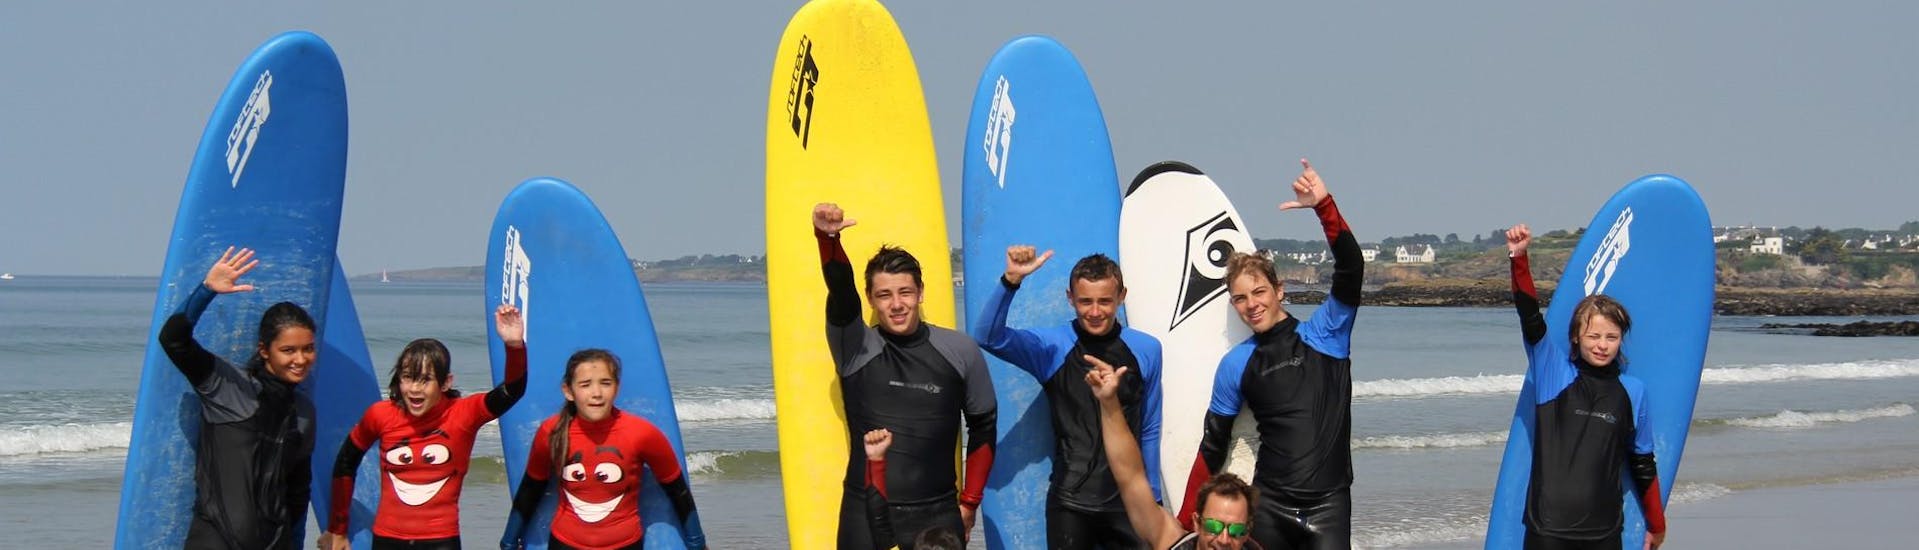 A group of kids posing with their boards for the photo with YouSurf in Guidel-Plage.